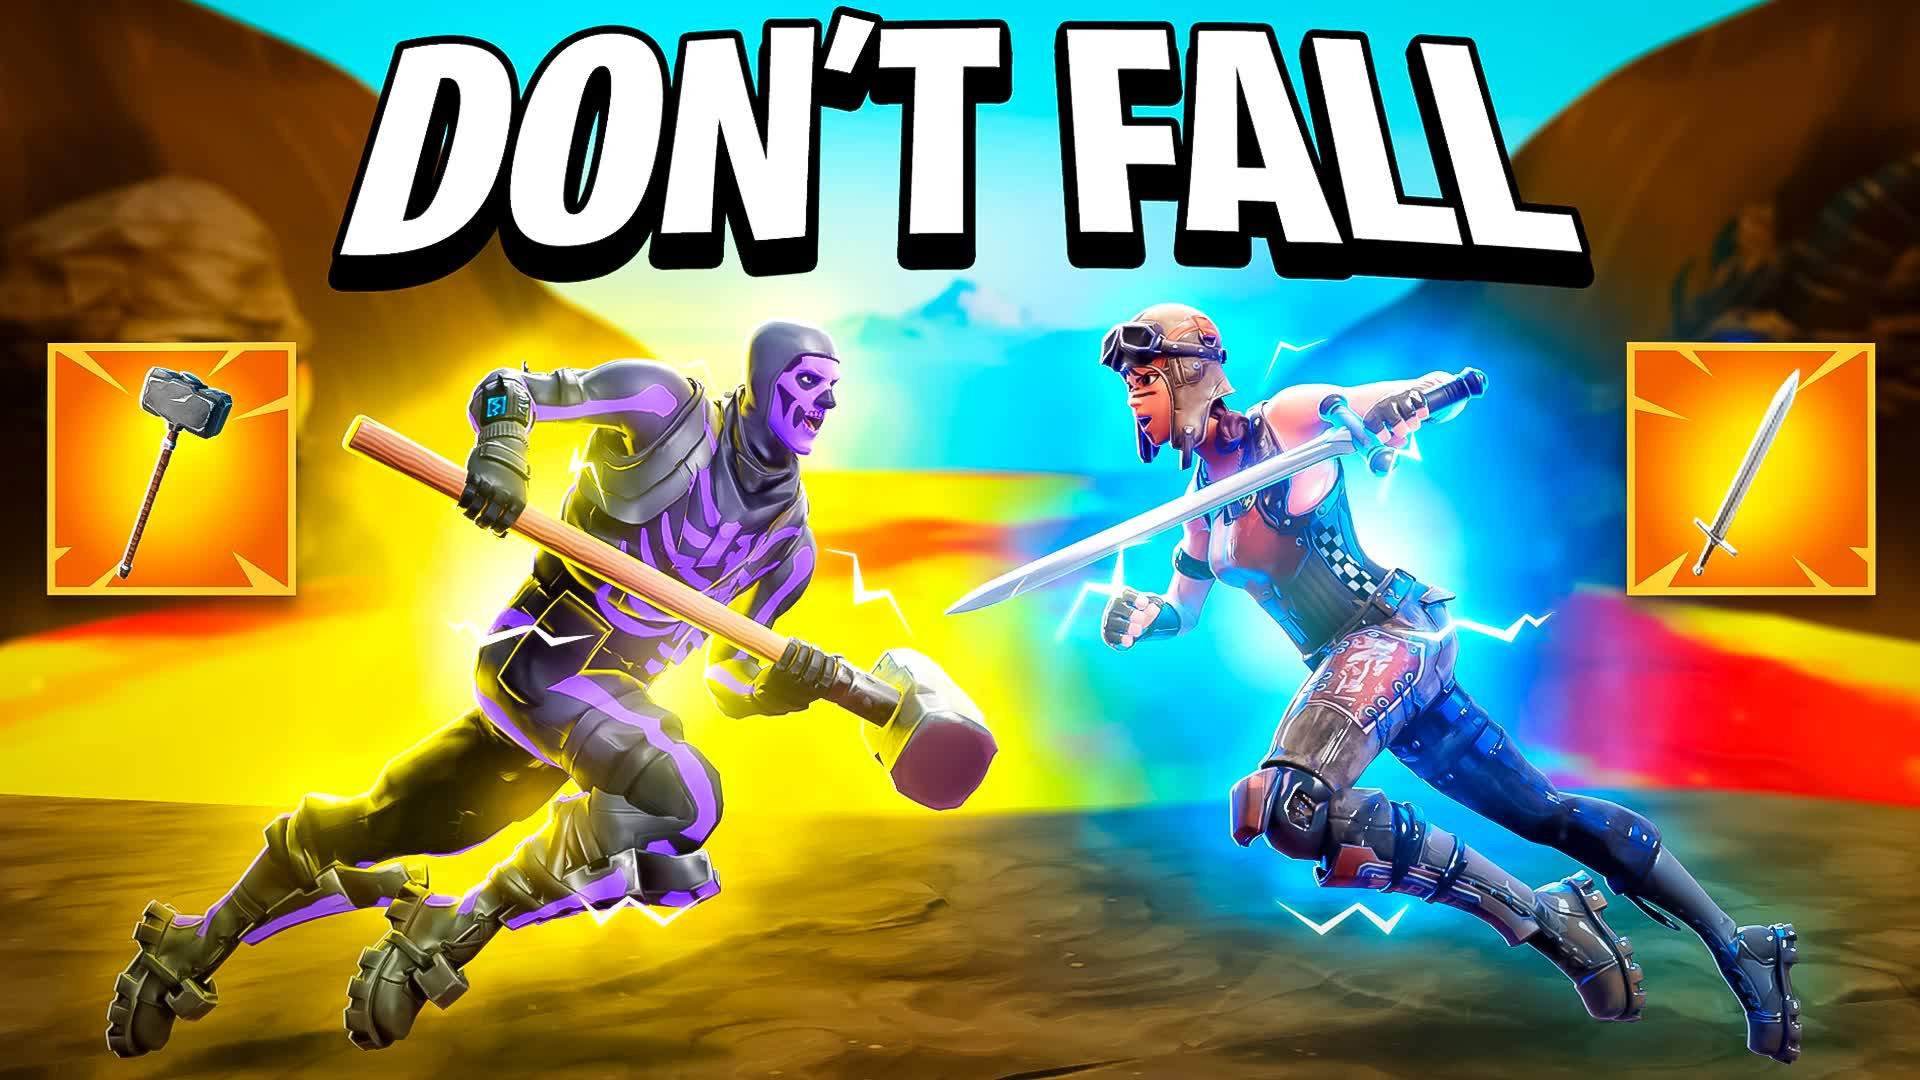 SWORD FIGHT - DON'T FALL